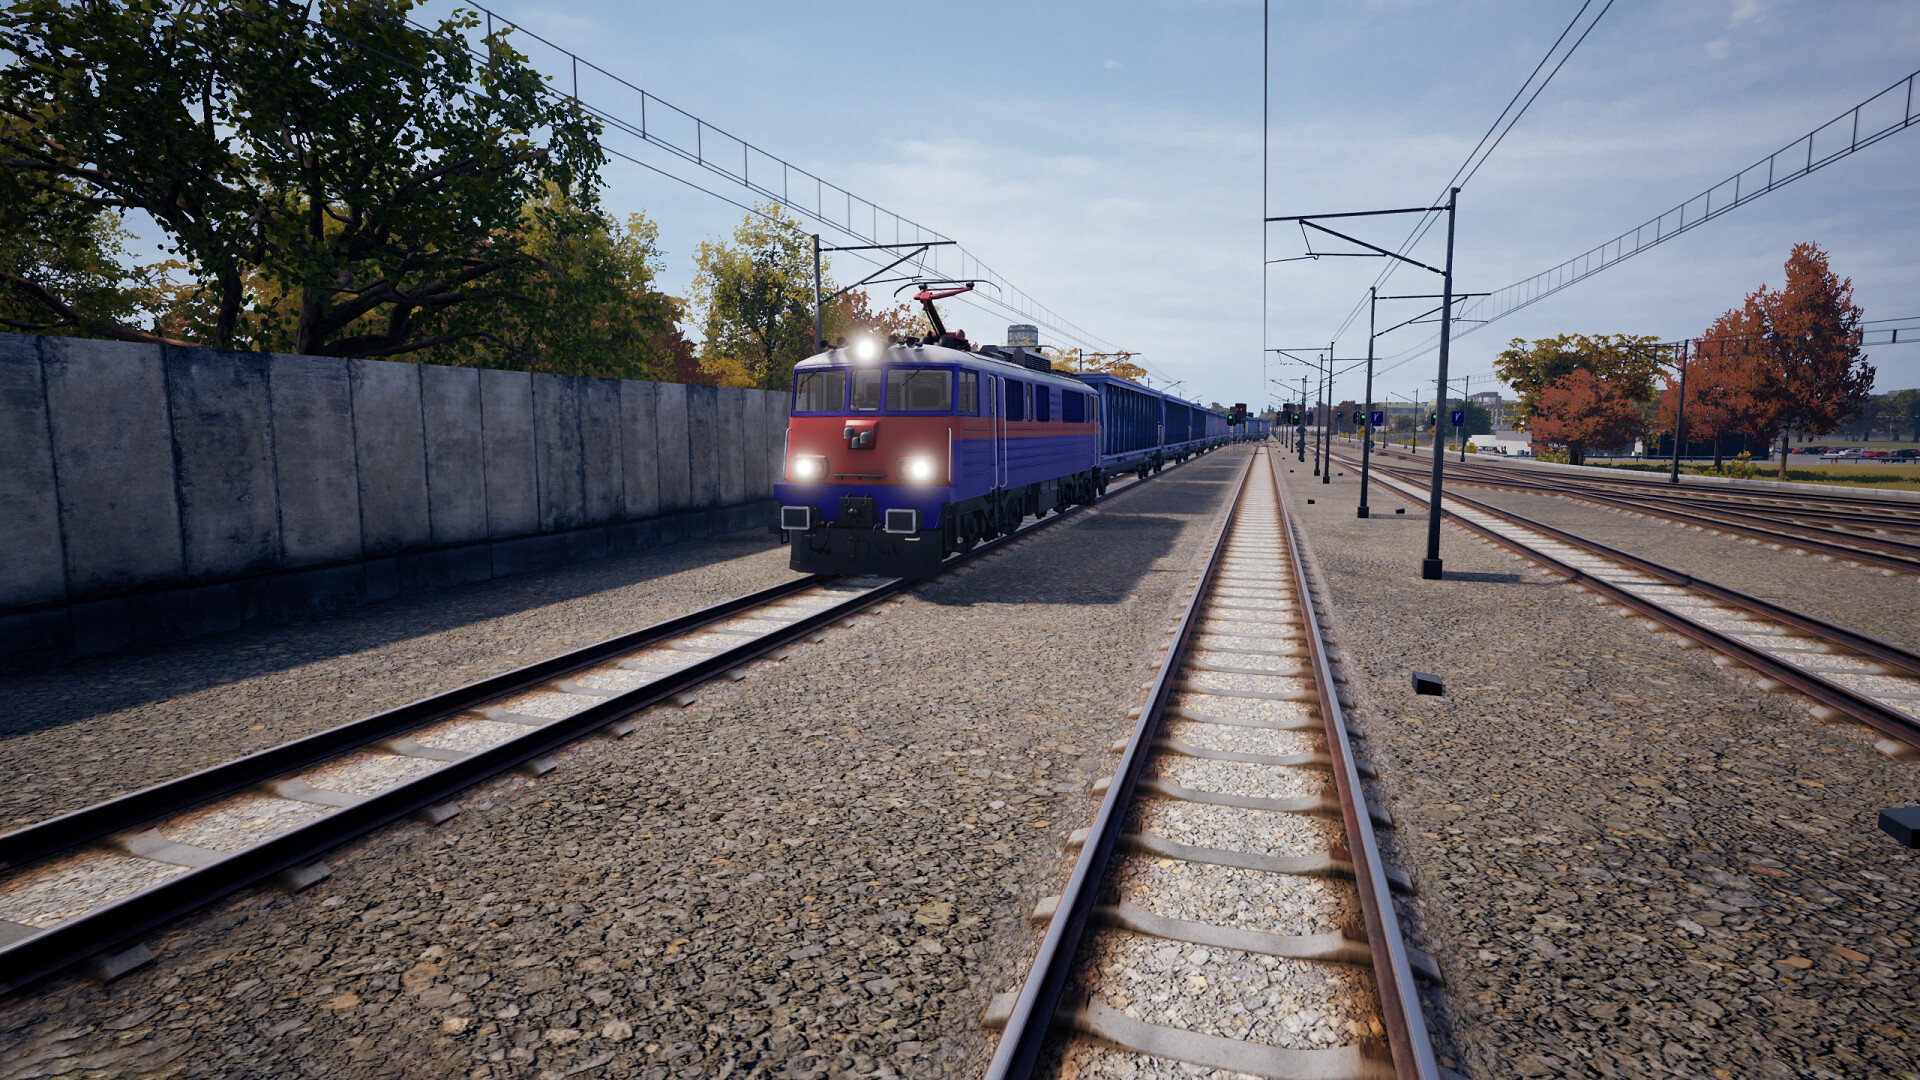 Train Life: A Railway Simulator Free Download for PC